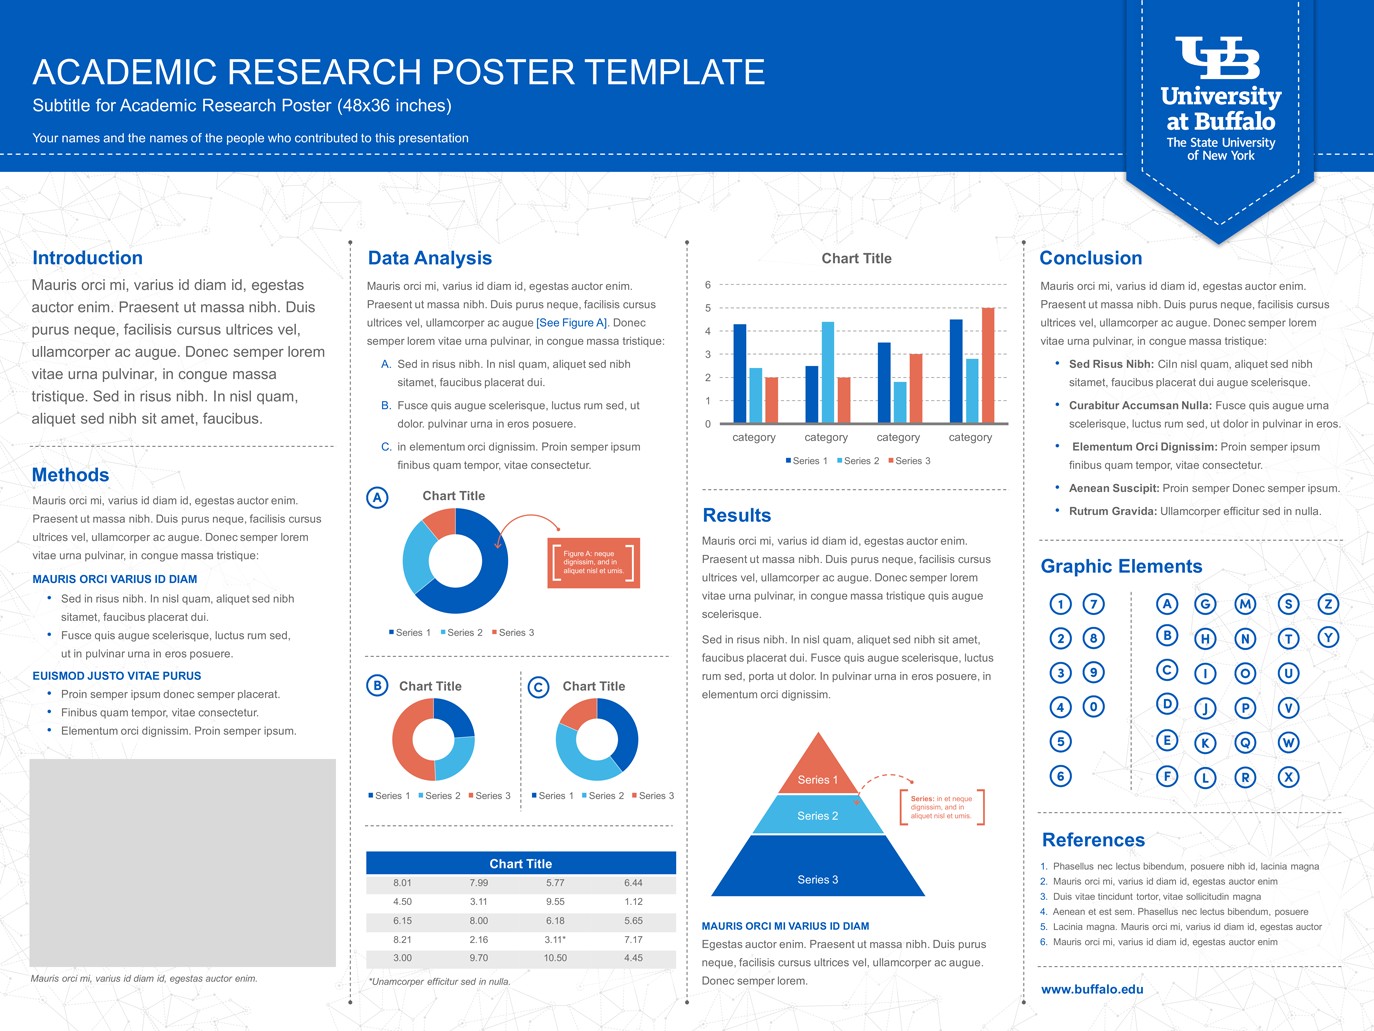 Academic Poster Template Photoshop Free